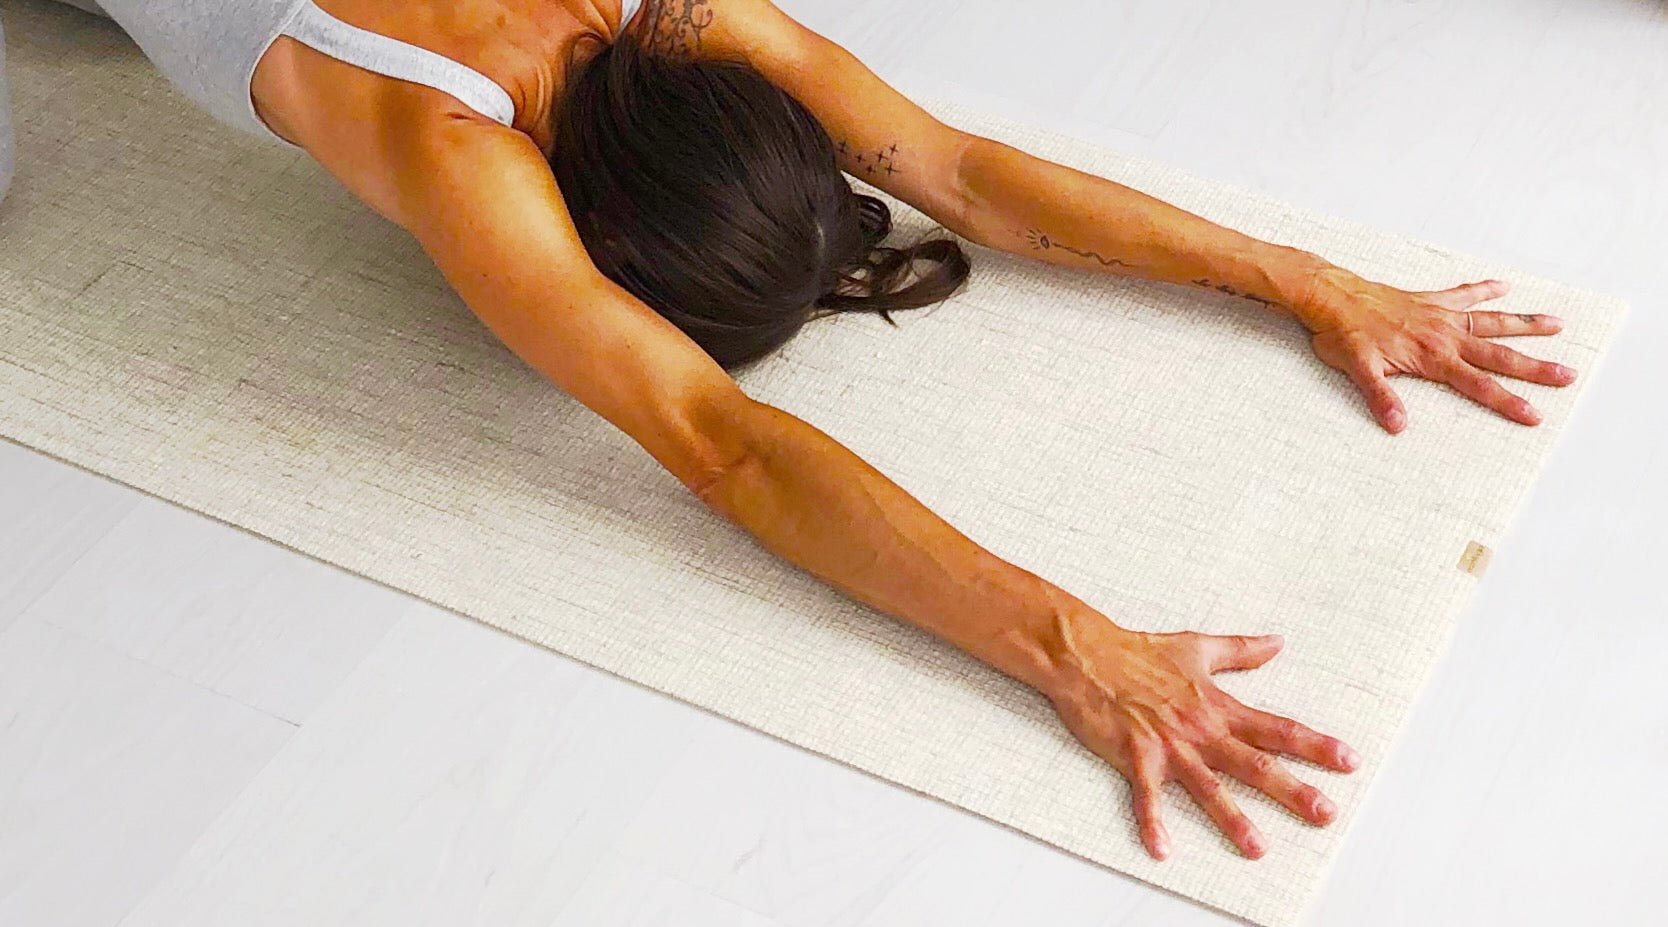 Root Chakra Yoga: 8 Poses to Get Grounded